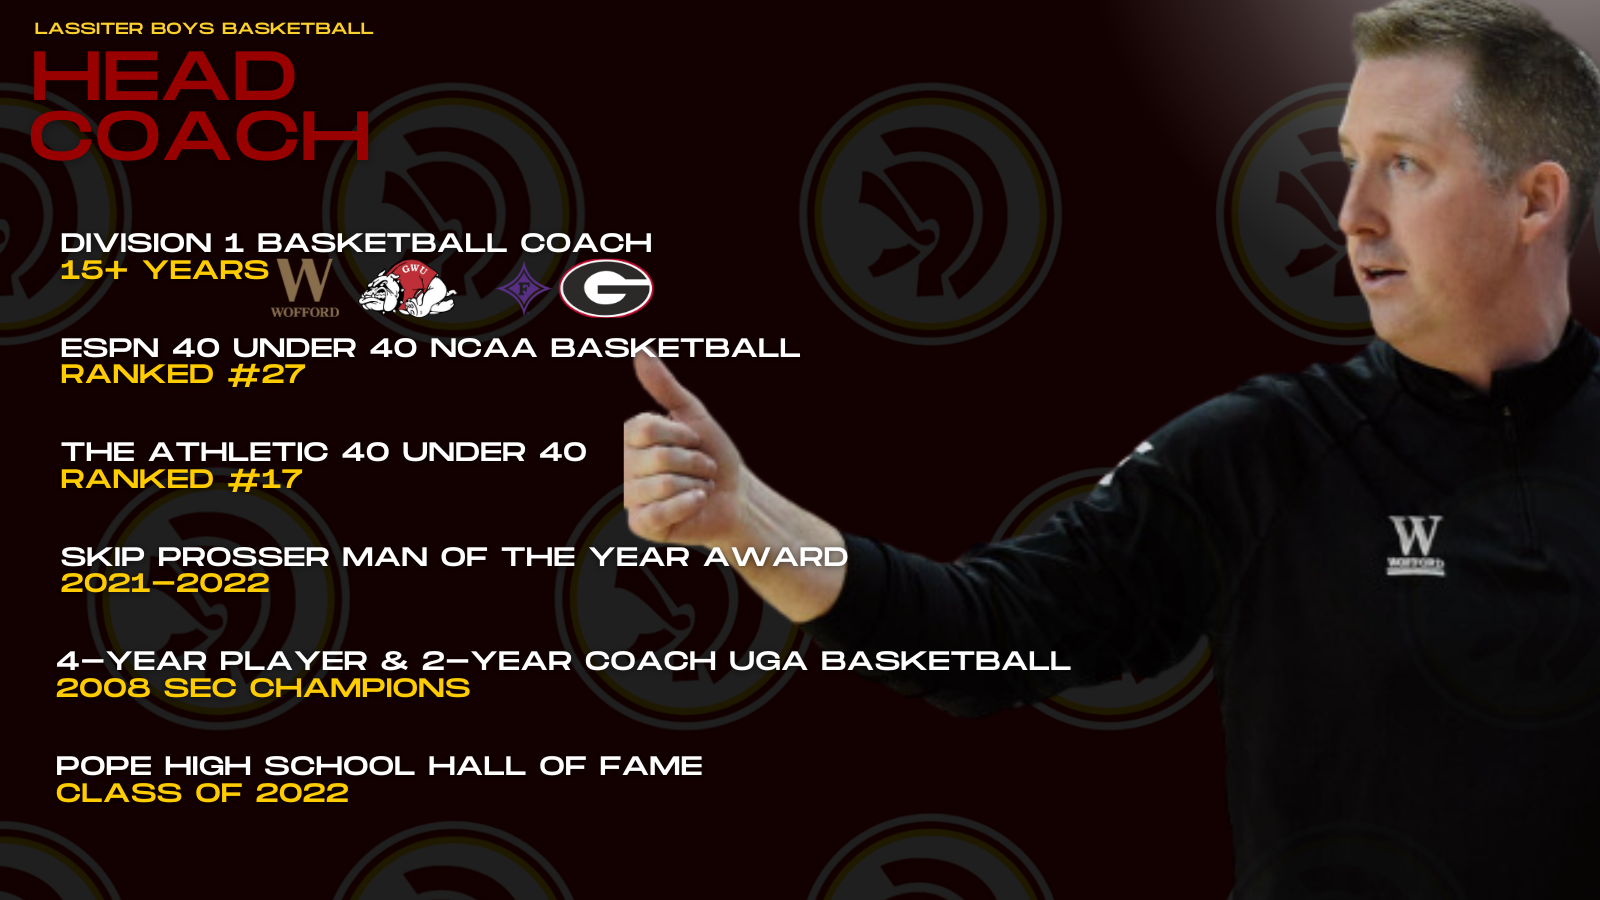 Lassiter%20New%20Bball%20Coach%20%20(1600%20×%20900%20px)%20(1).png